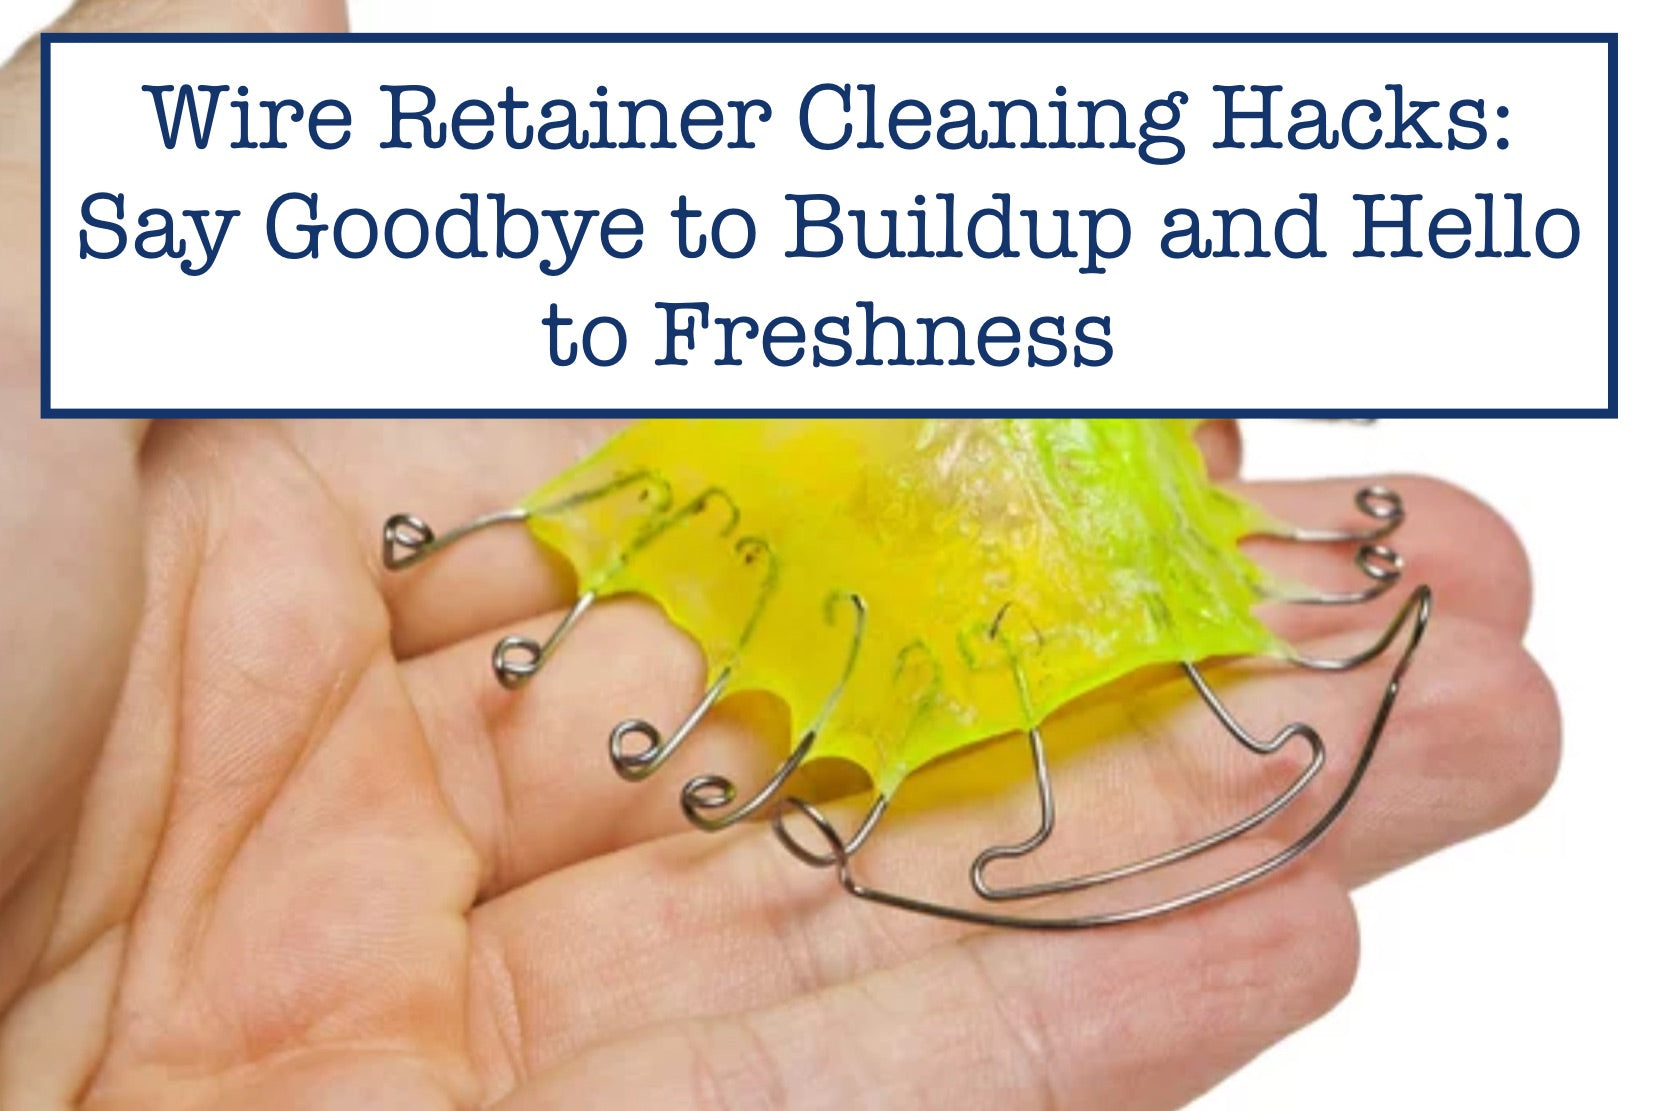 Wire Retainer Cleaning Hacks: Say Goodbye to Buildup and Hello to Freshness